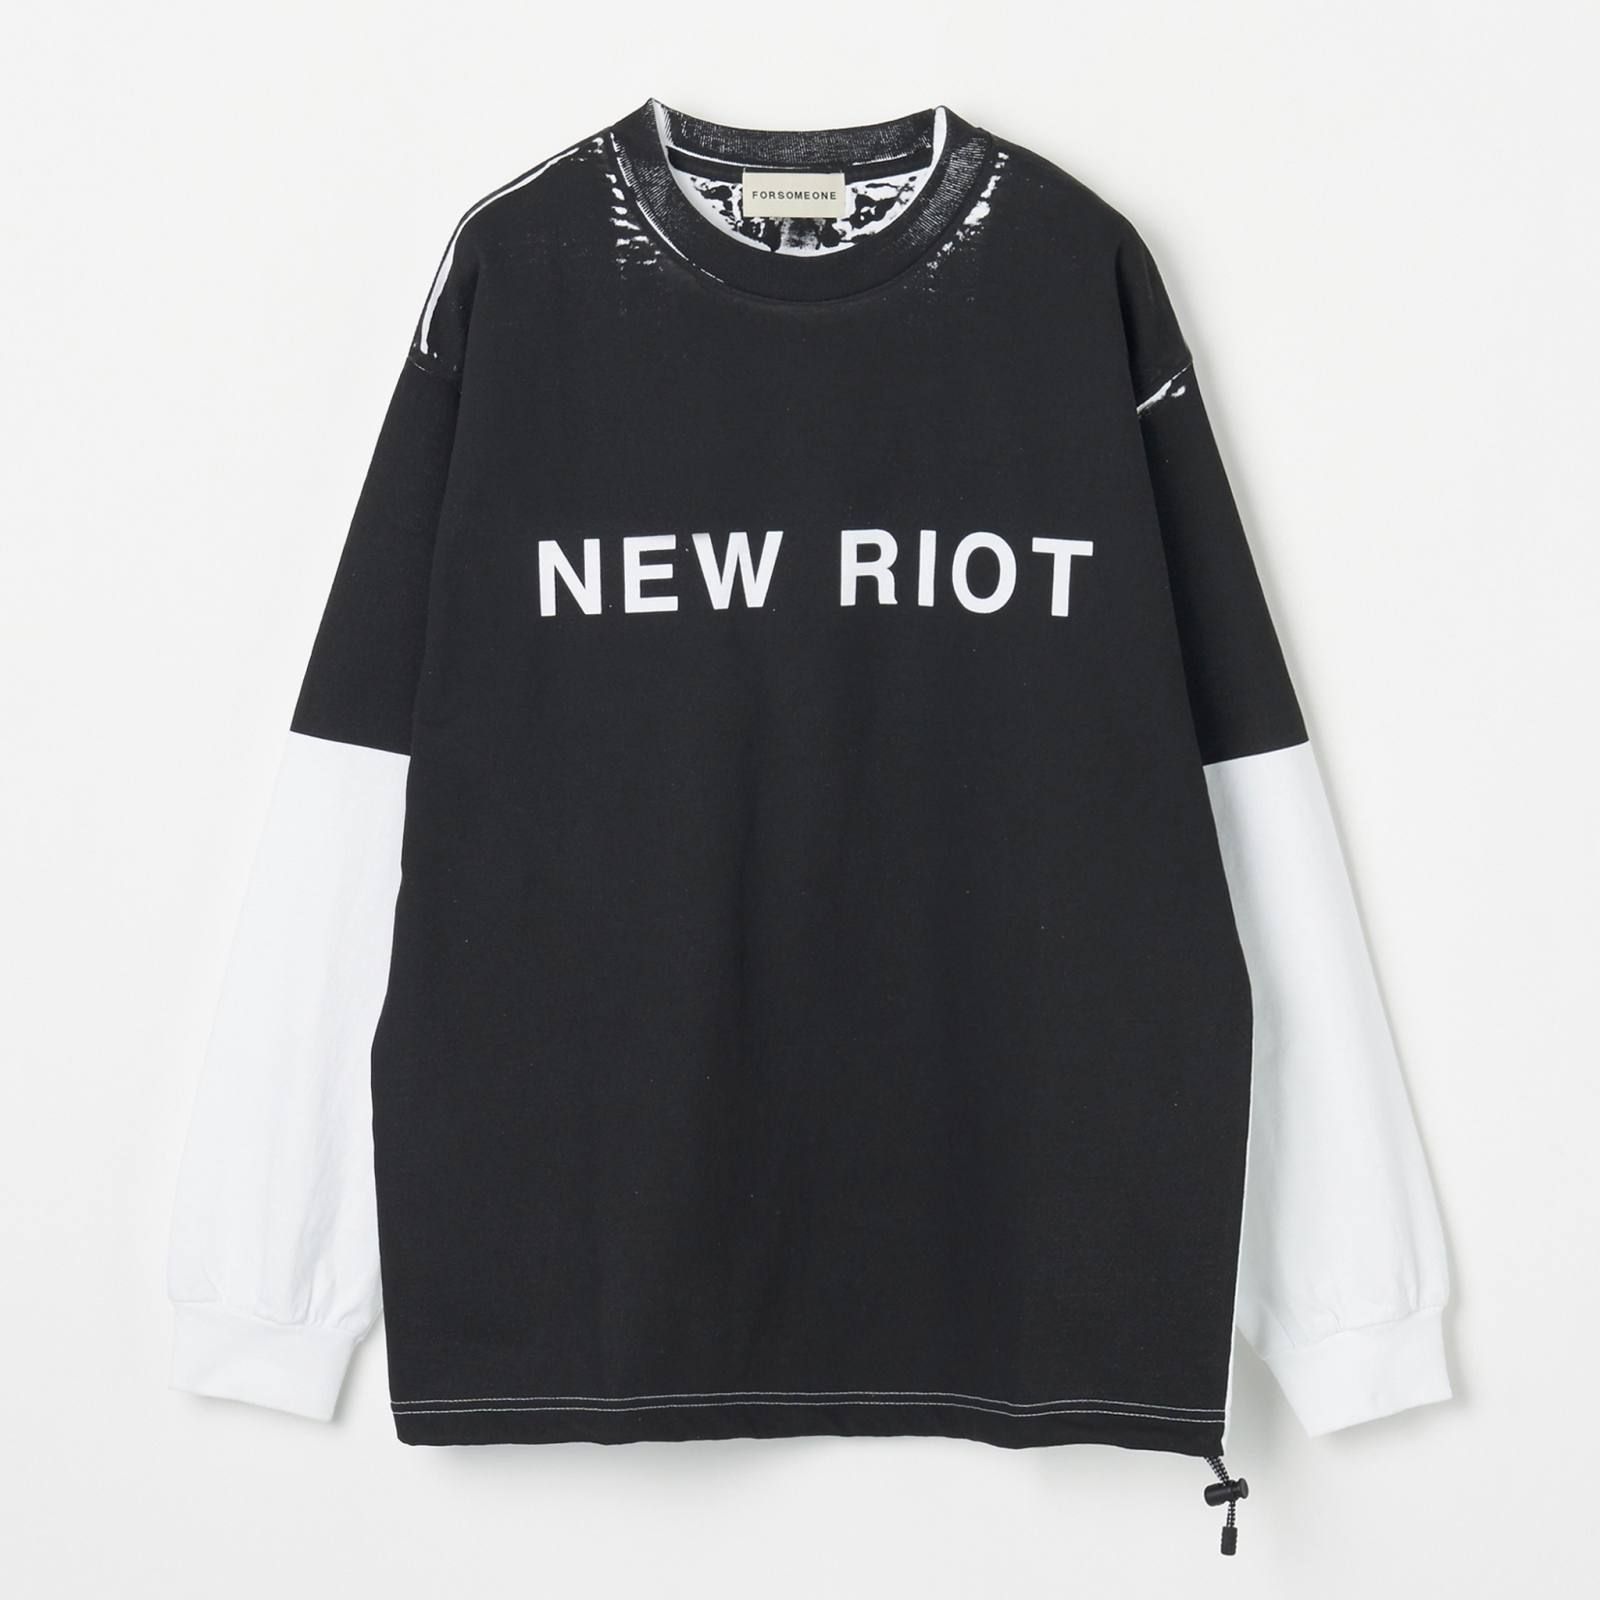 FORSOMEONE - NEW RIOT LT